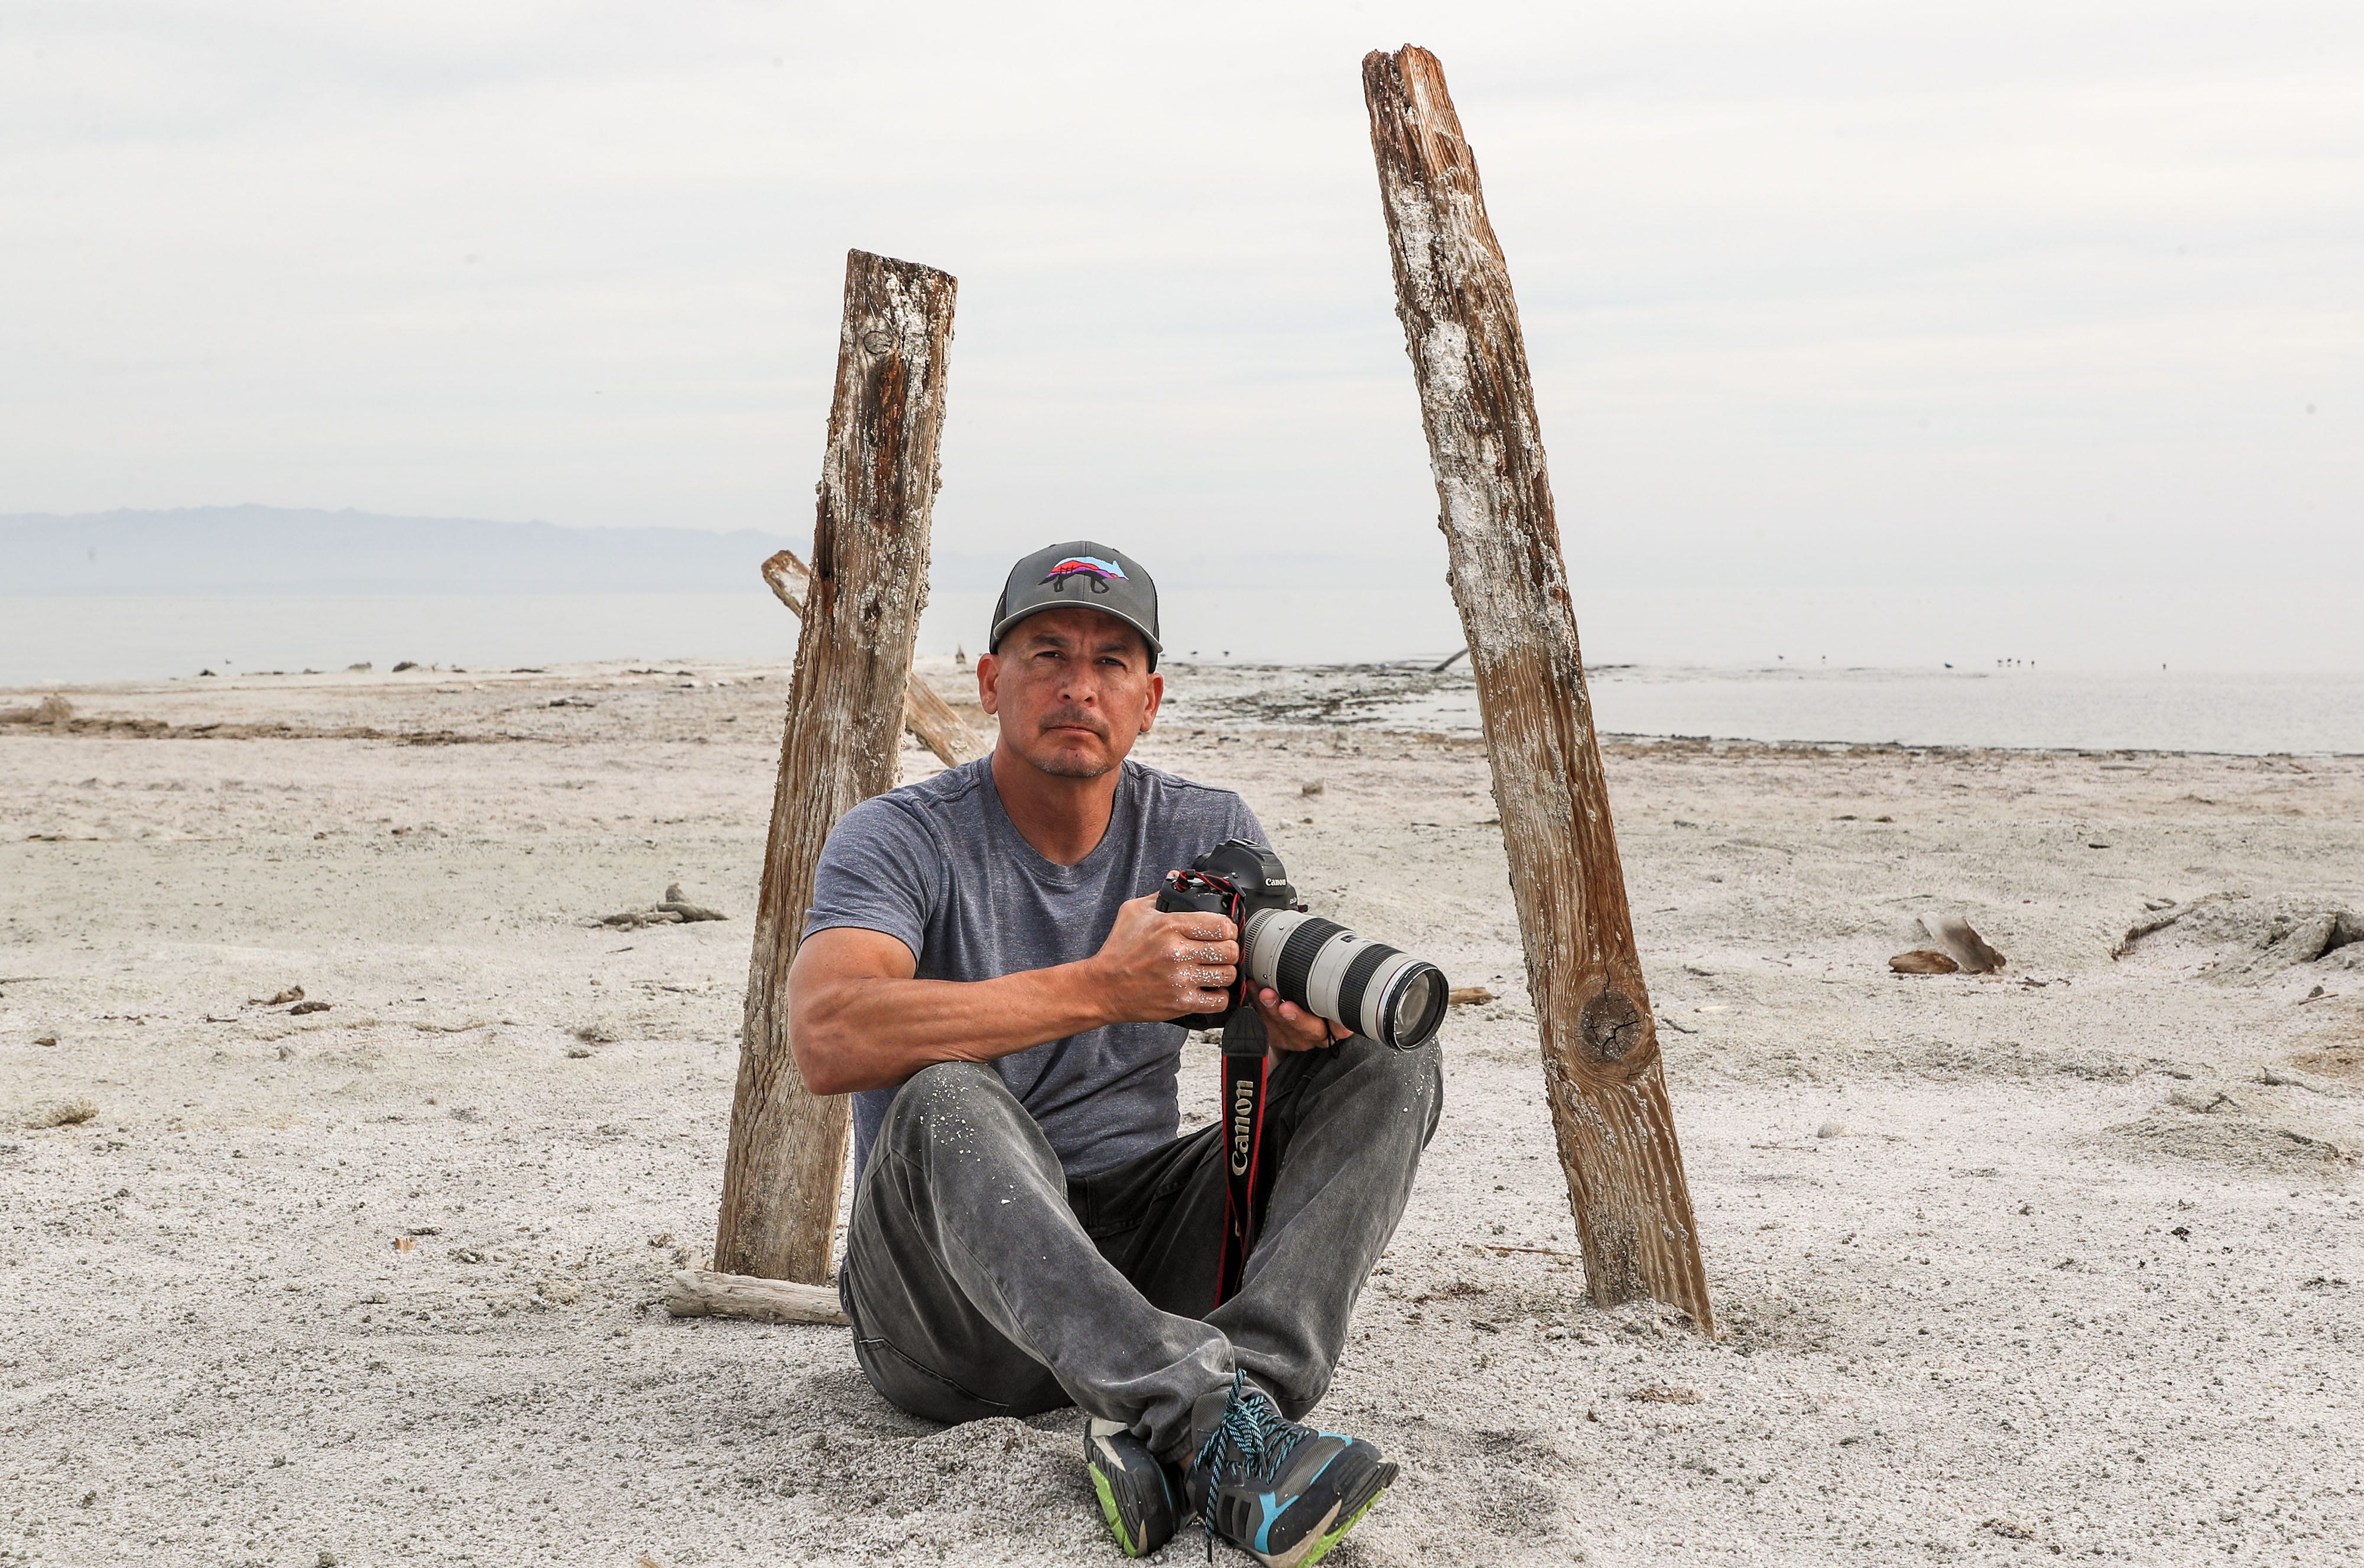 Photojournalist Jay Calderon has been photographing the Salton Sea for more than 20 years.